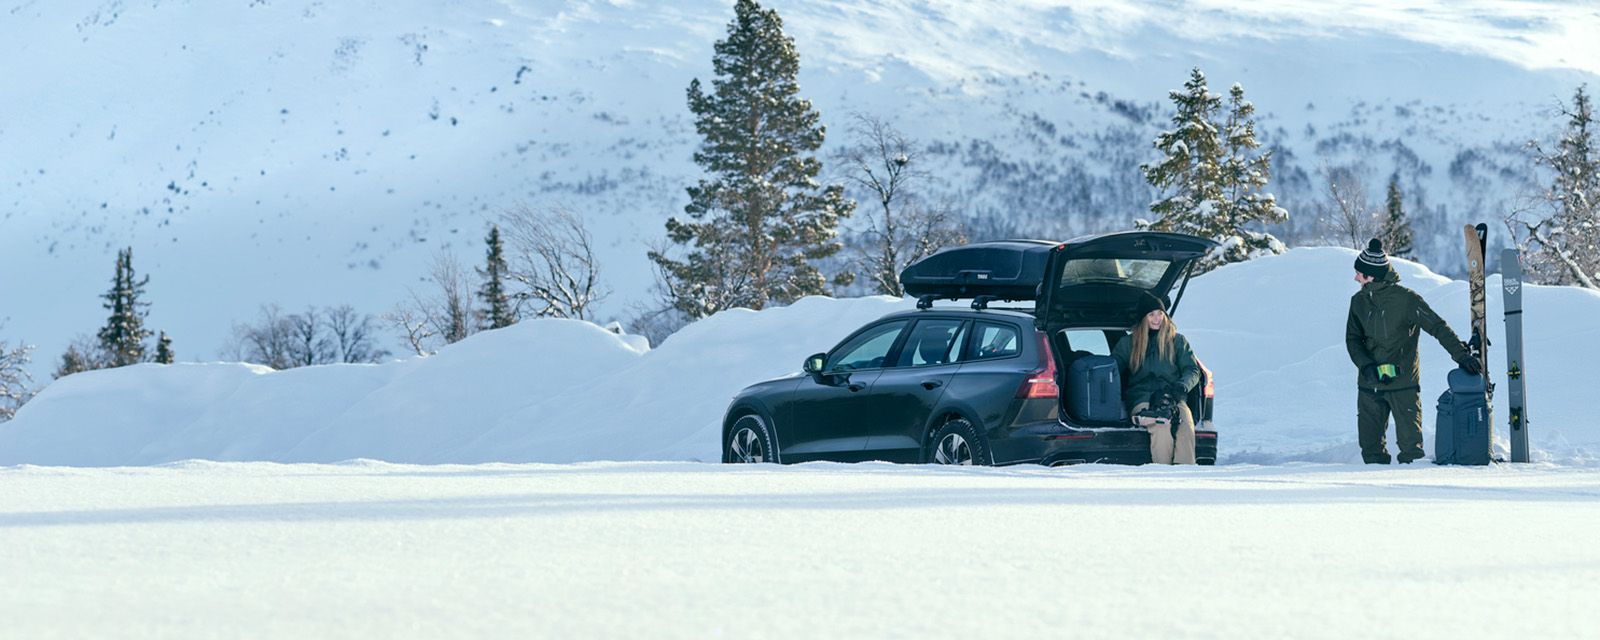 Two people stand by a car parked in the snow holding ski boot backpacks, and ski bags.